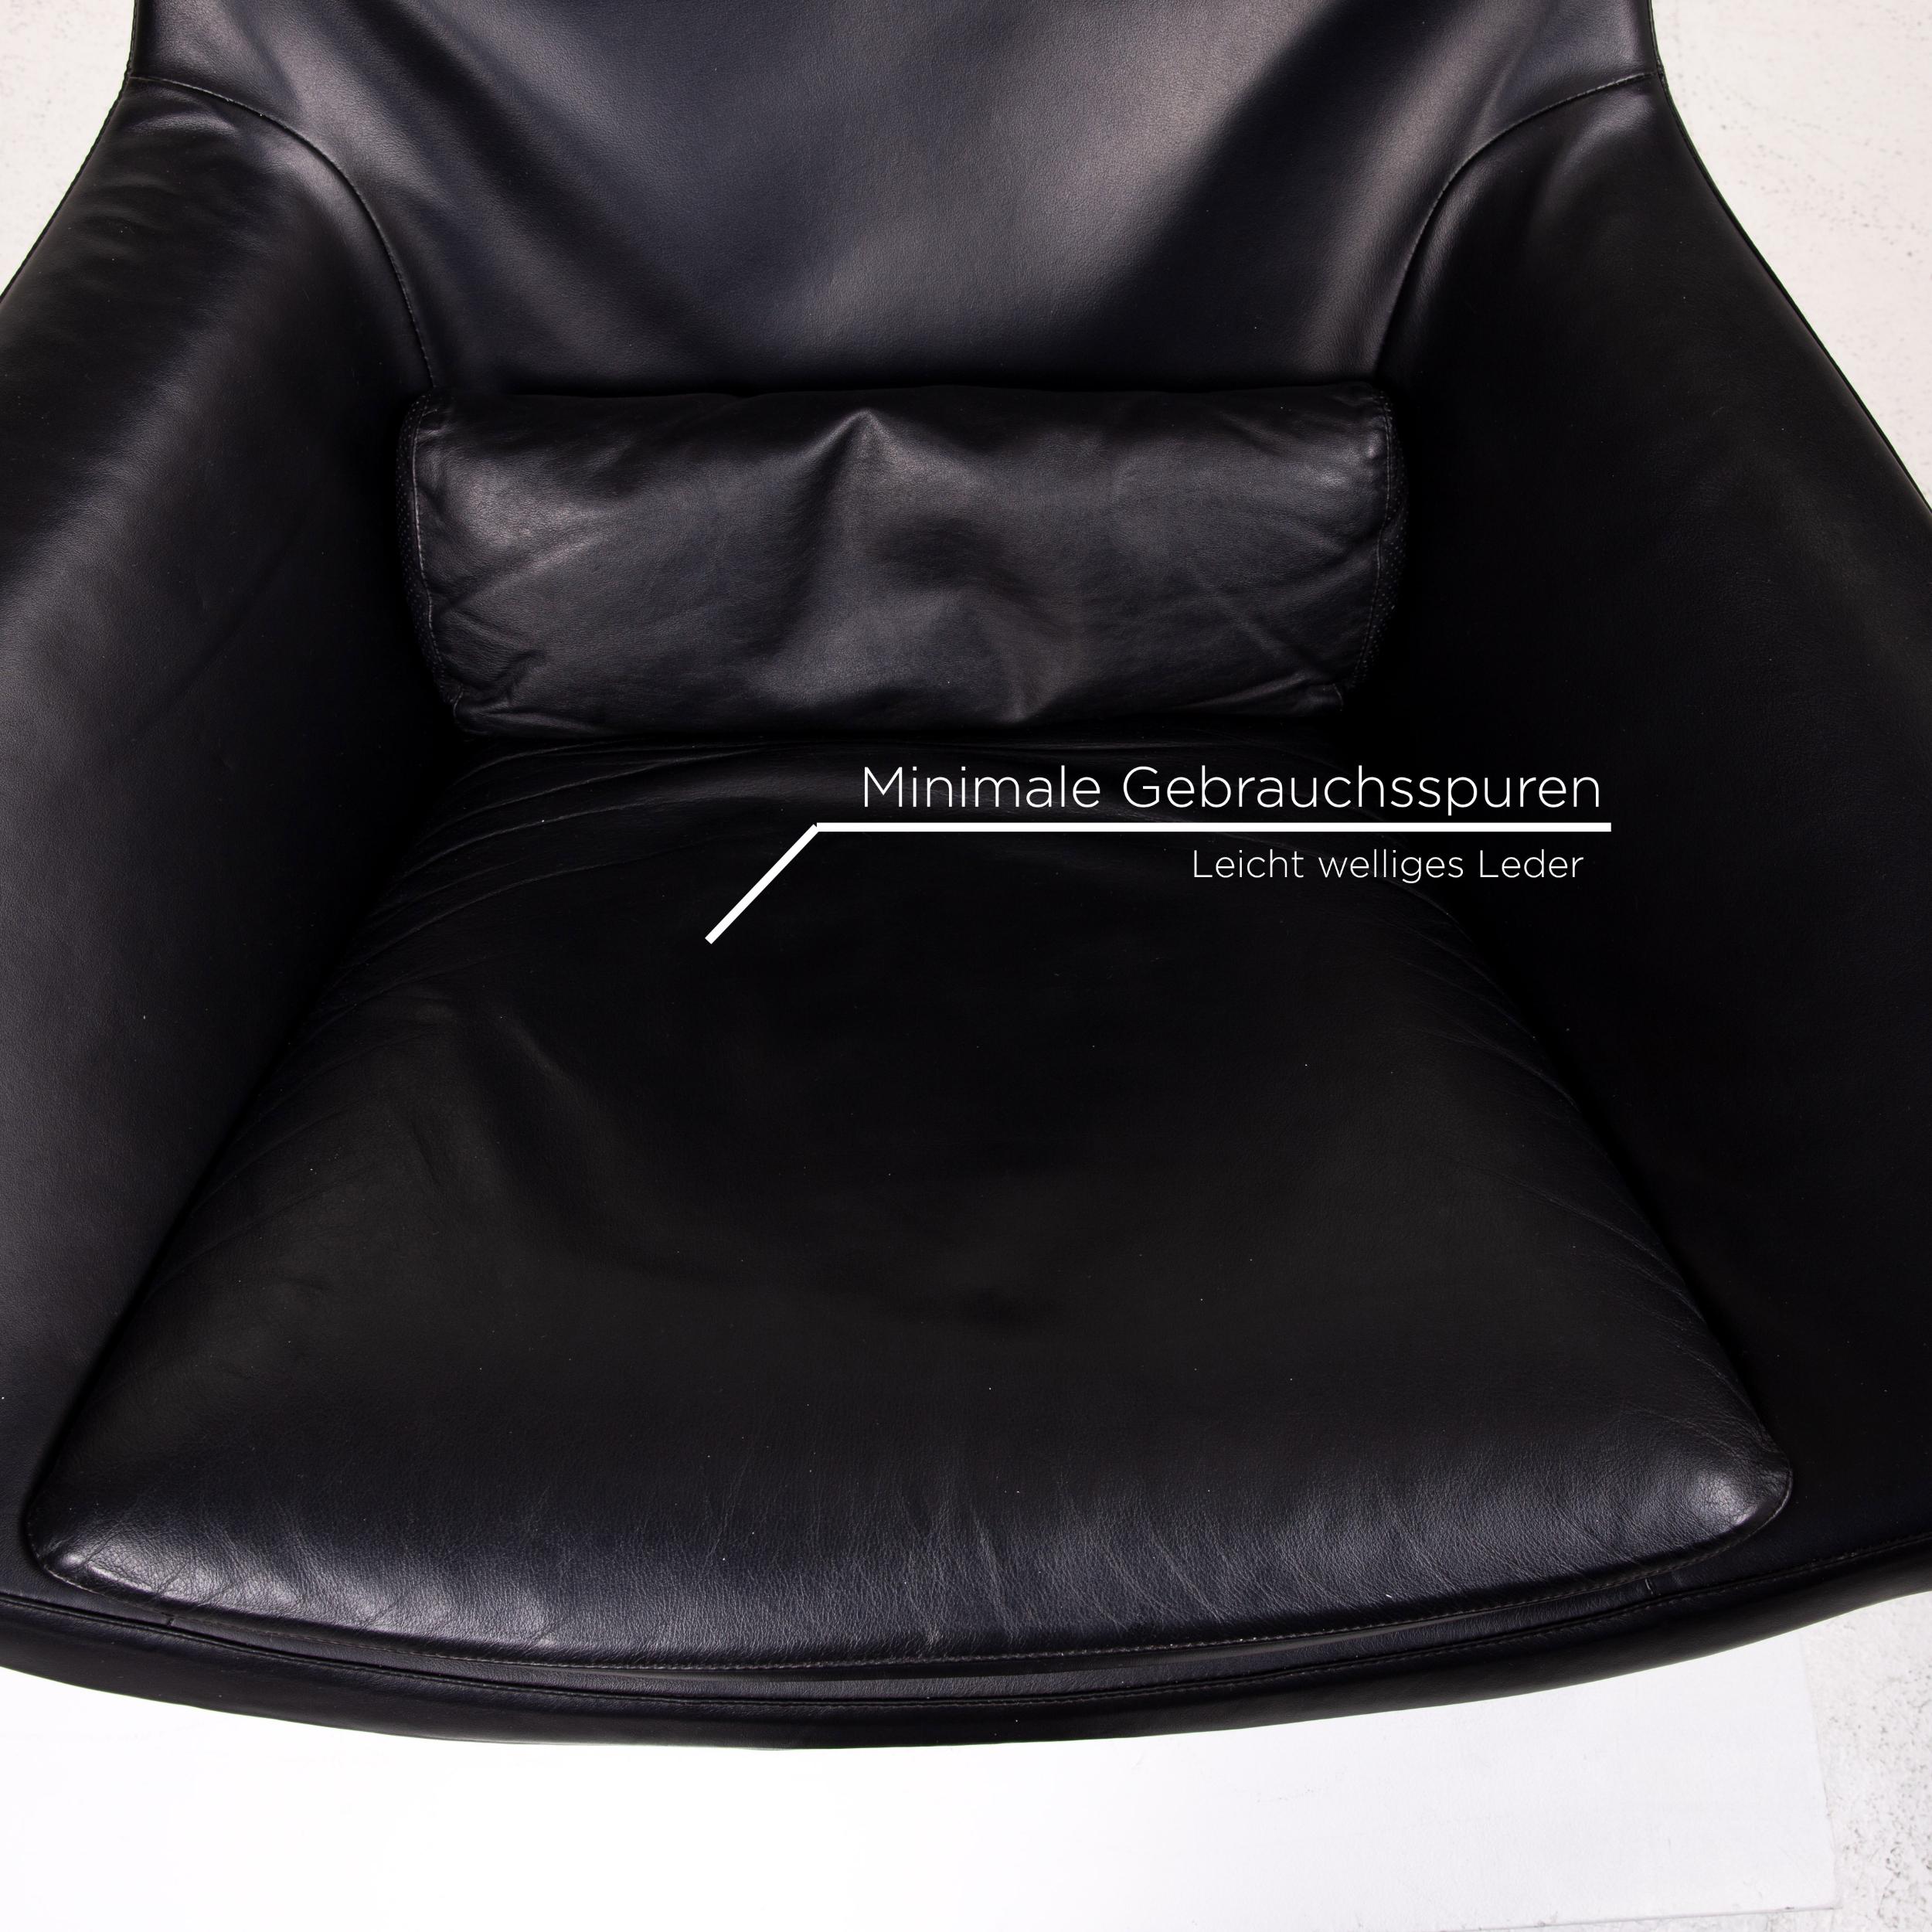 B&B Italia Metropolitan Leather Armchair Incl. Stool Black In Good Condition For Sale In Cologne, DE